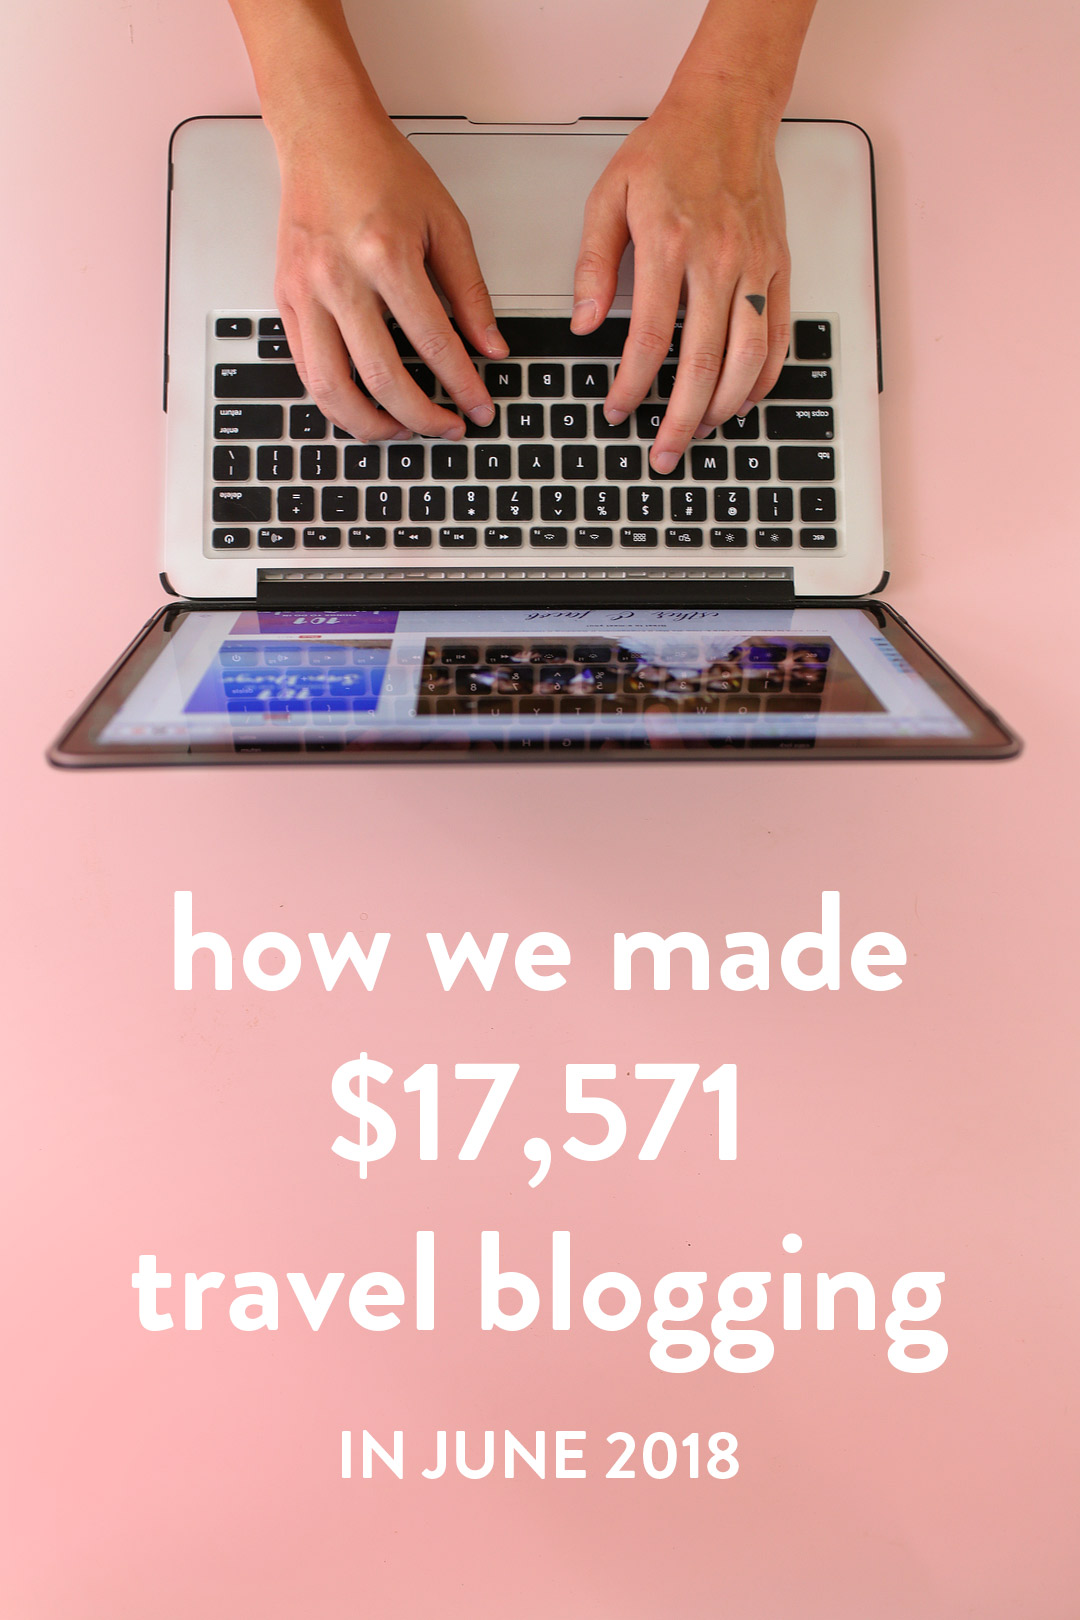 How we made $17,571 last month travel blogging • Our first blog income report • How can you make money blogging • Blogging Tips // Local Adventurer #travelblogger #blogincome #blogger #travelblog